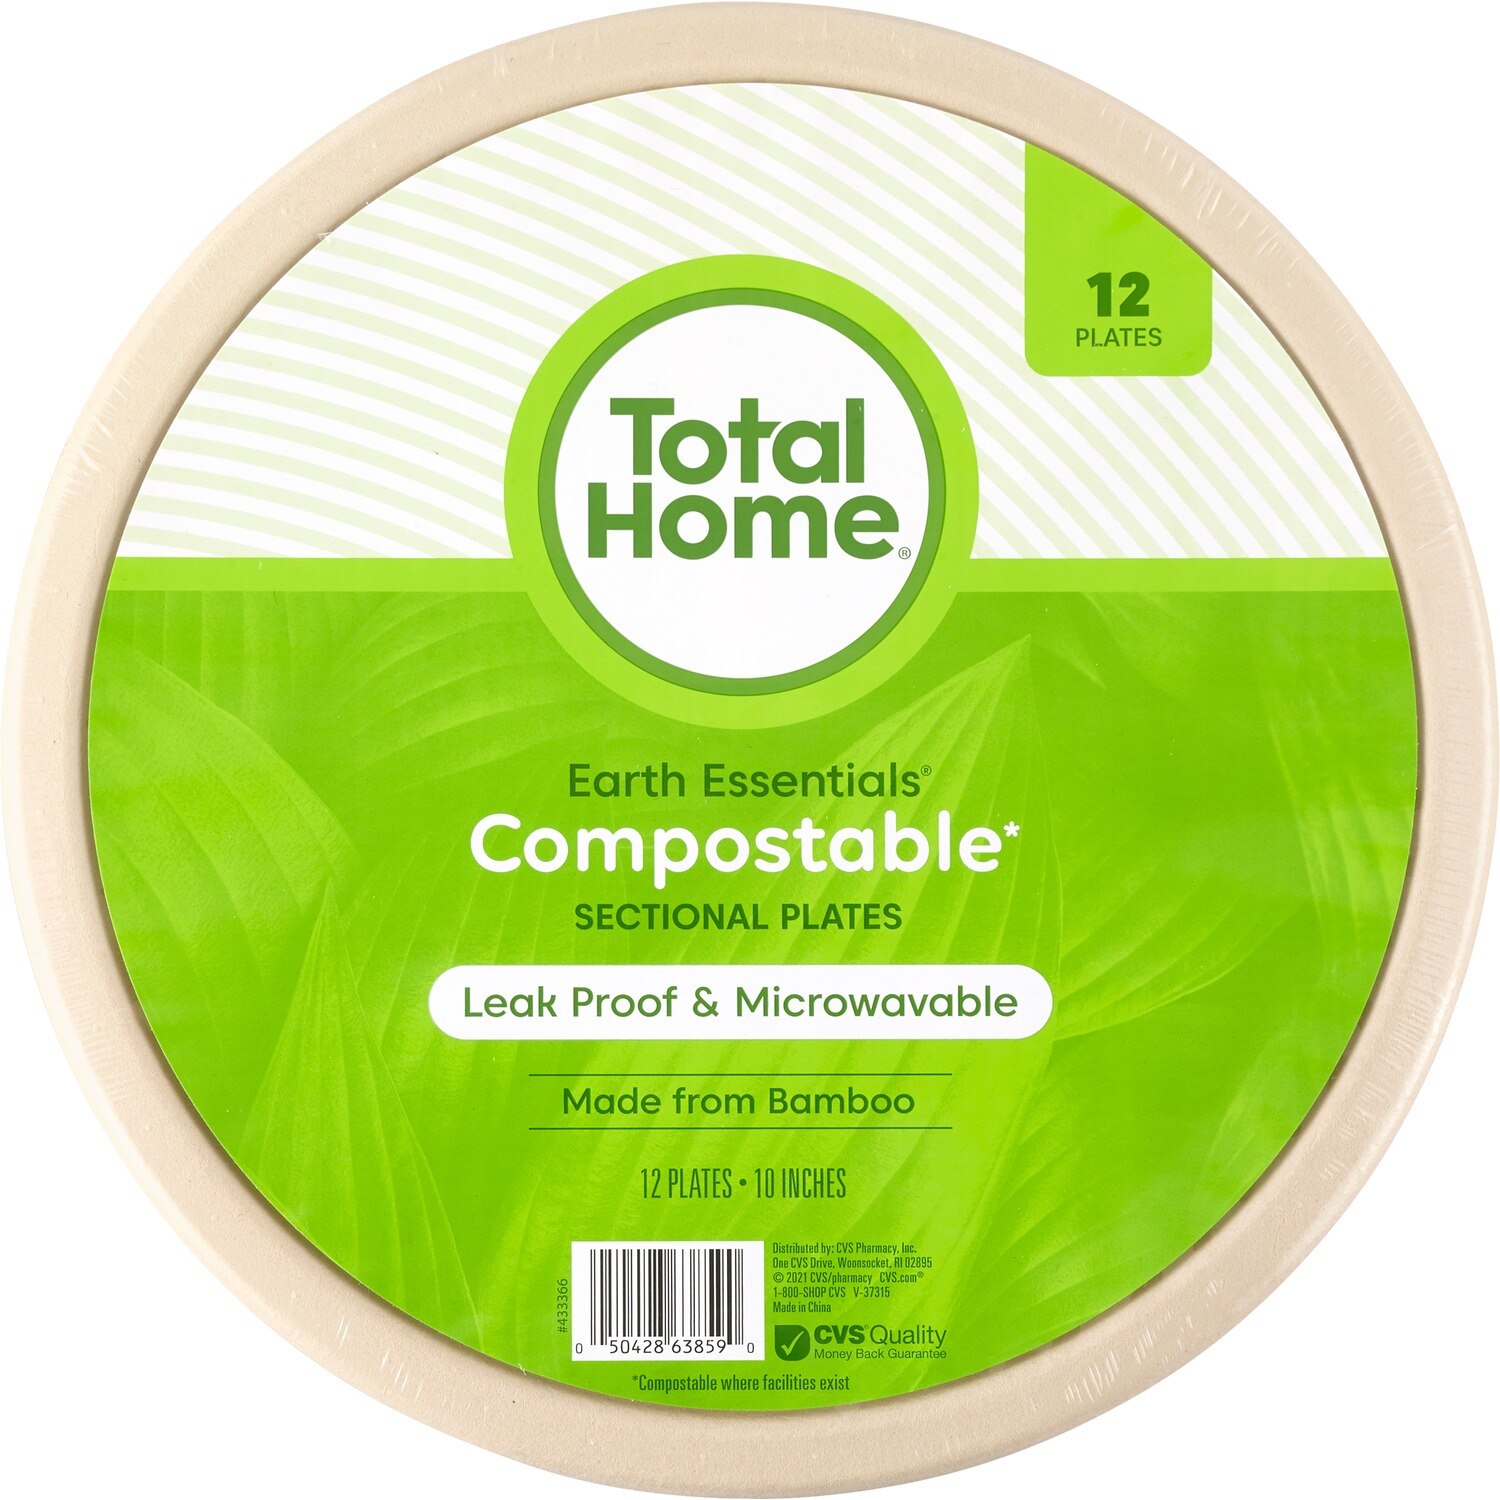 Total Home Earth Essentials Compostable Bamboo Sectional Plates, 10 in, 12CT